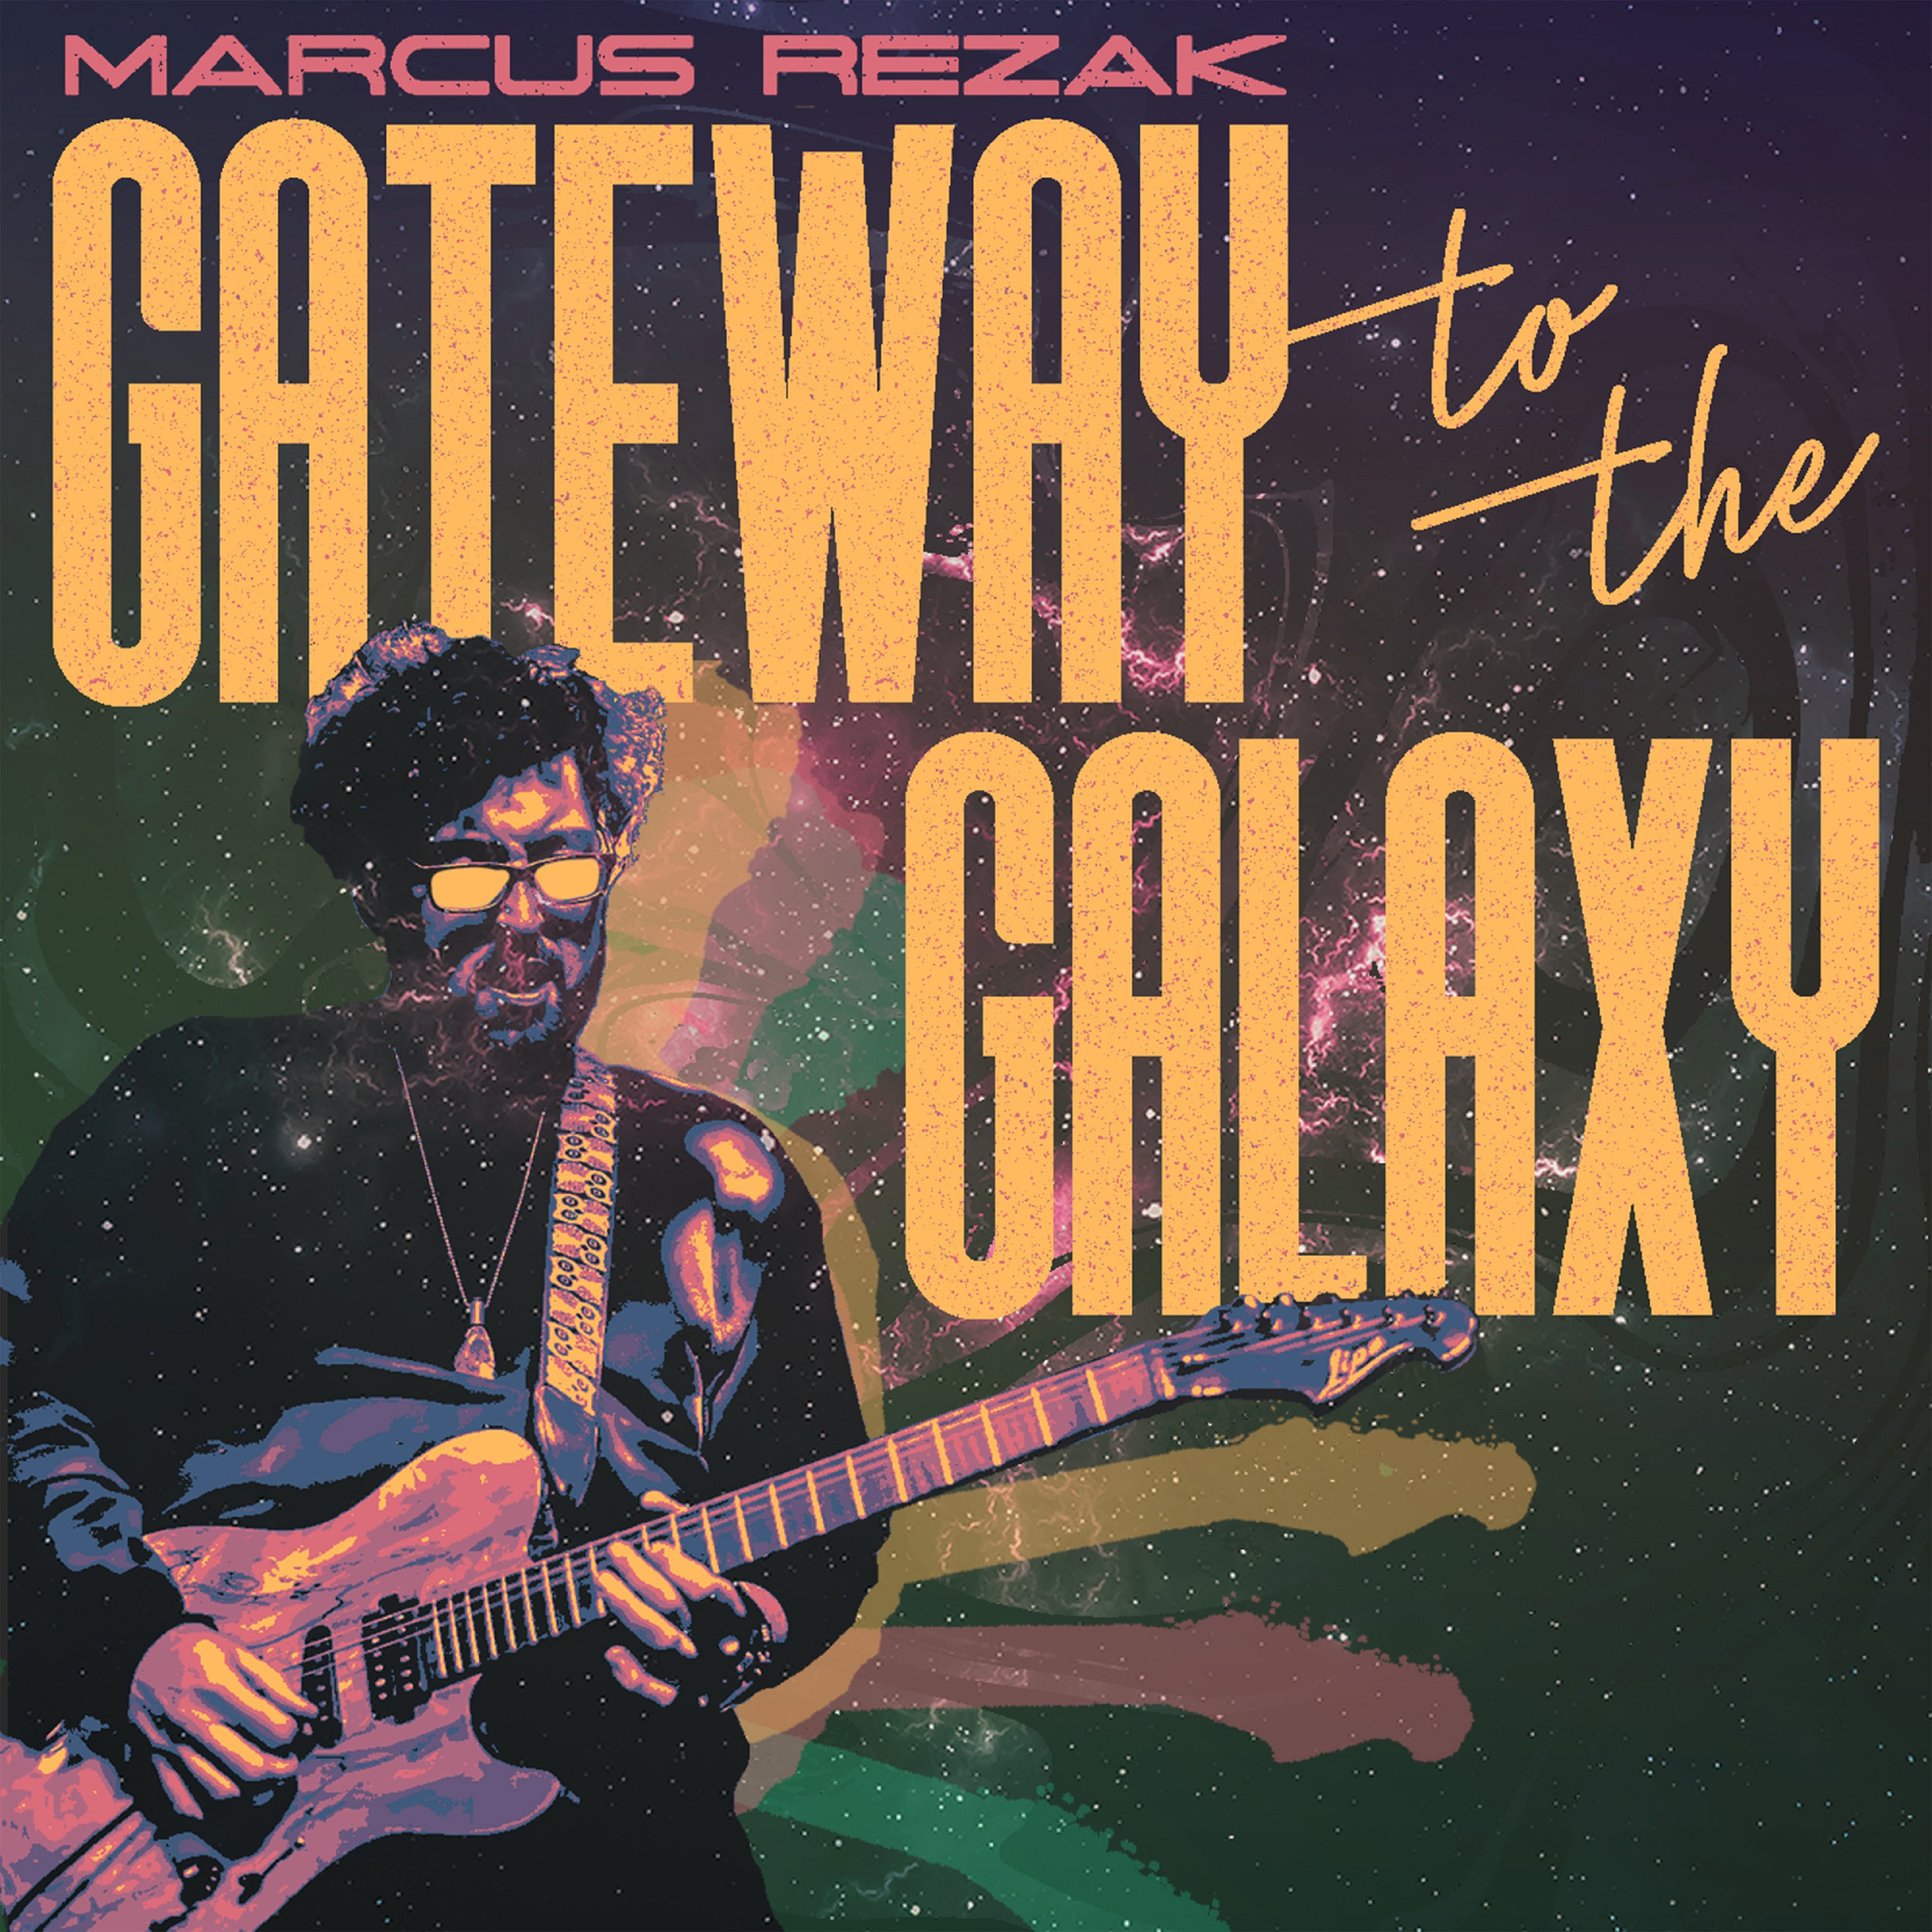 Marcus Rezak's "Gateway to the Galaxy" Out 11/9